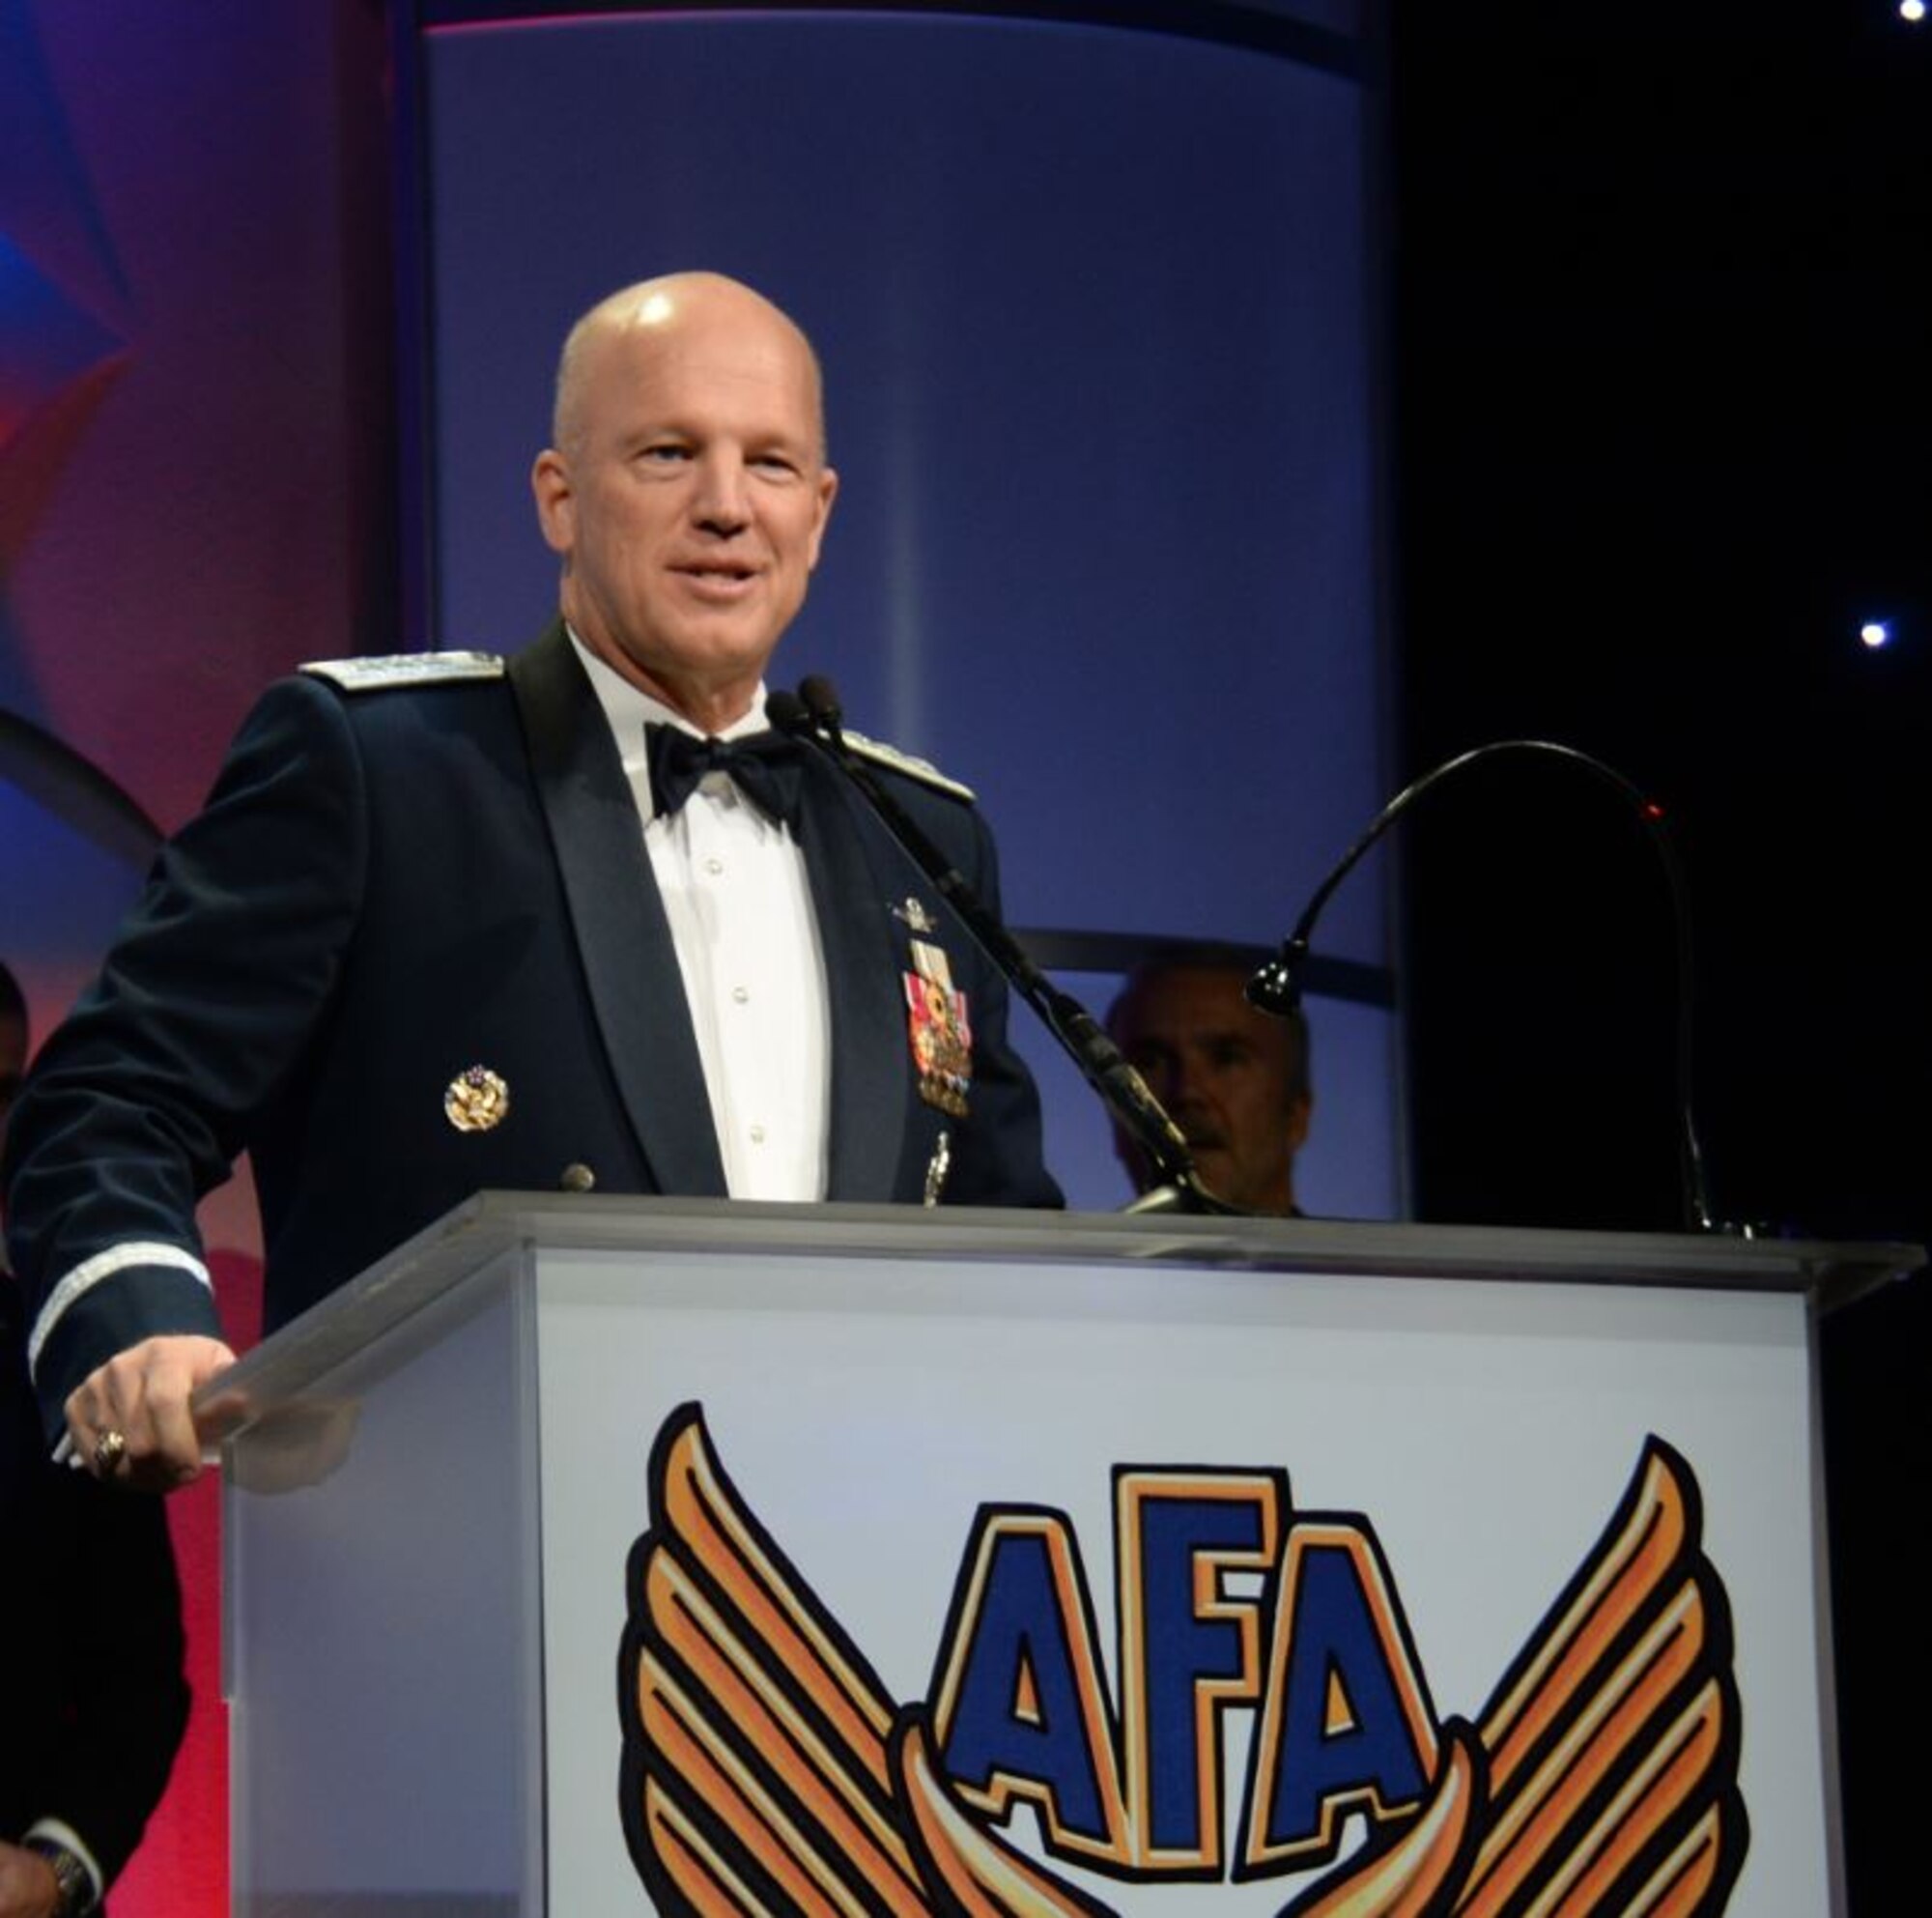 Lt. Gen. John Raymond, Headquarters U.S. Air Force deputy chief of staff for operations, gives an acceptance speech after receiving the Air Force Association General Thomas D. White Space Award Nov. 20, 2015. Air Force Chief of Staff Gen. Mark A. Welsh III nominated Raymond for this award for his role as the 14th Air Force and Air Force Space Command commander, and Joint Functional Component Command for Space and U.S. Strategic Command commander. (Courtesy photo/Shelly Kemp)